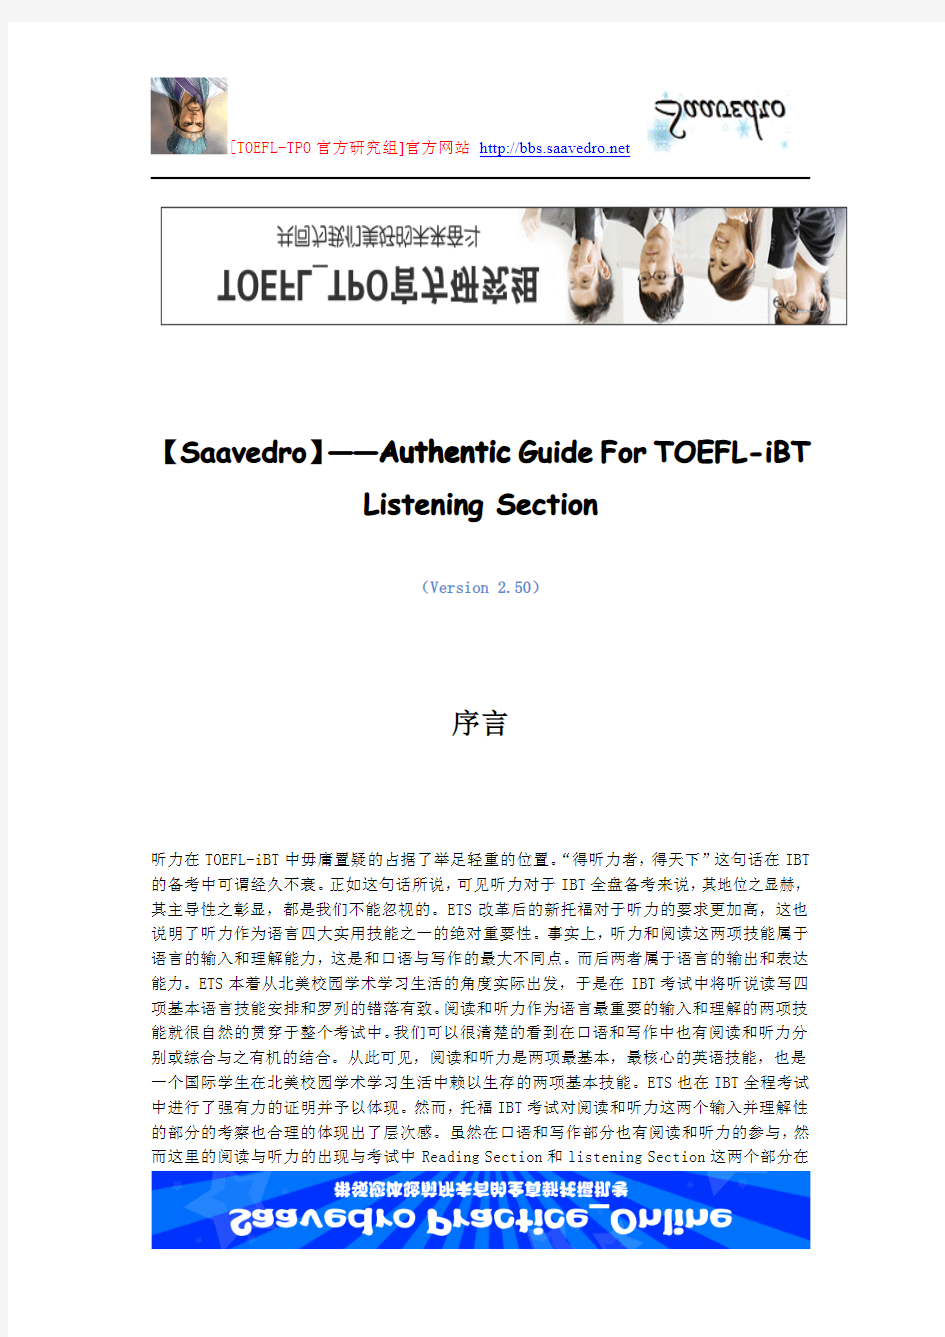 【Saavedro】——Authentic Guide For TOEFL-iBT Listening Section